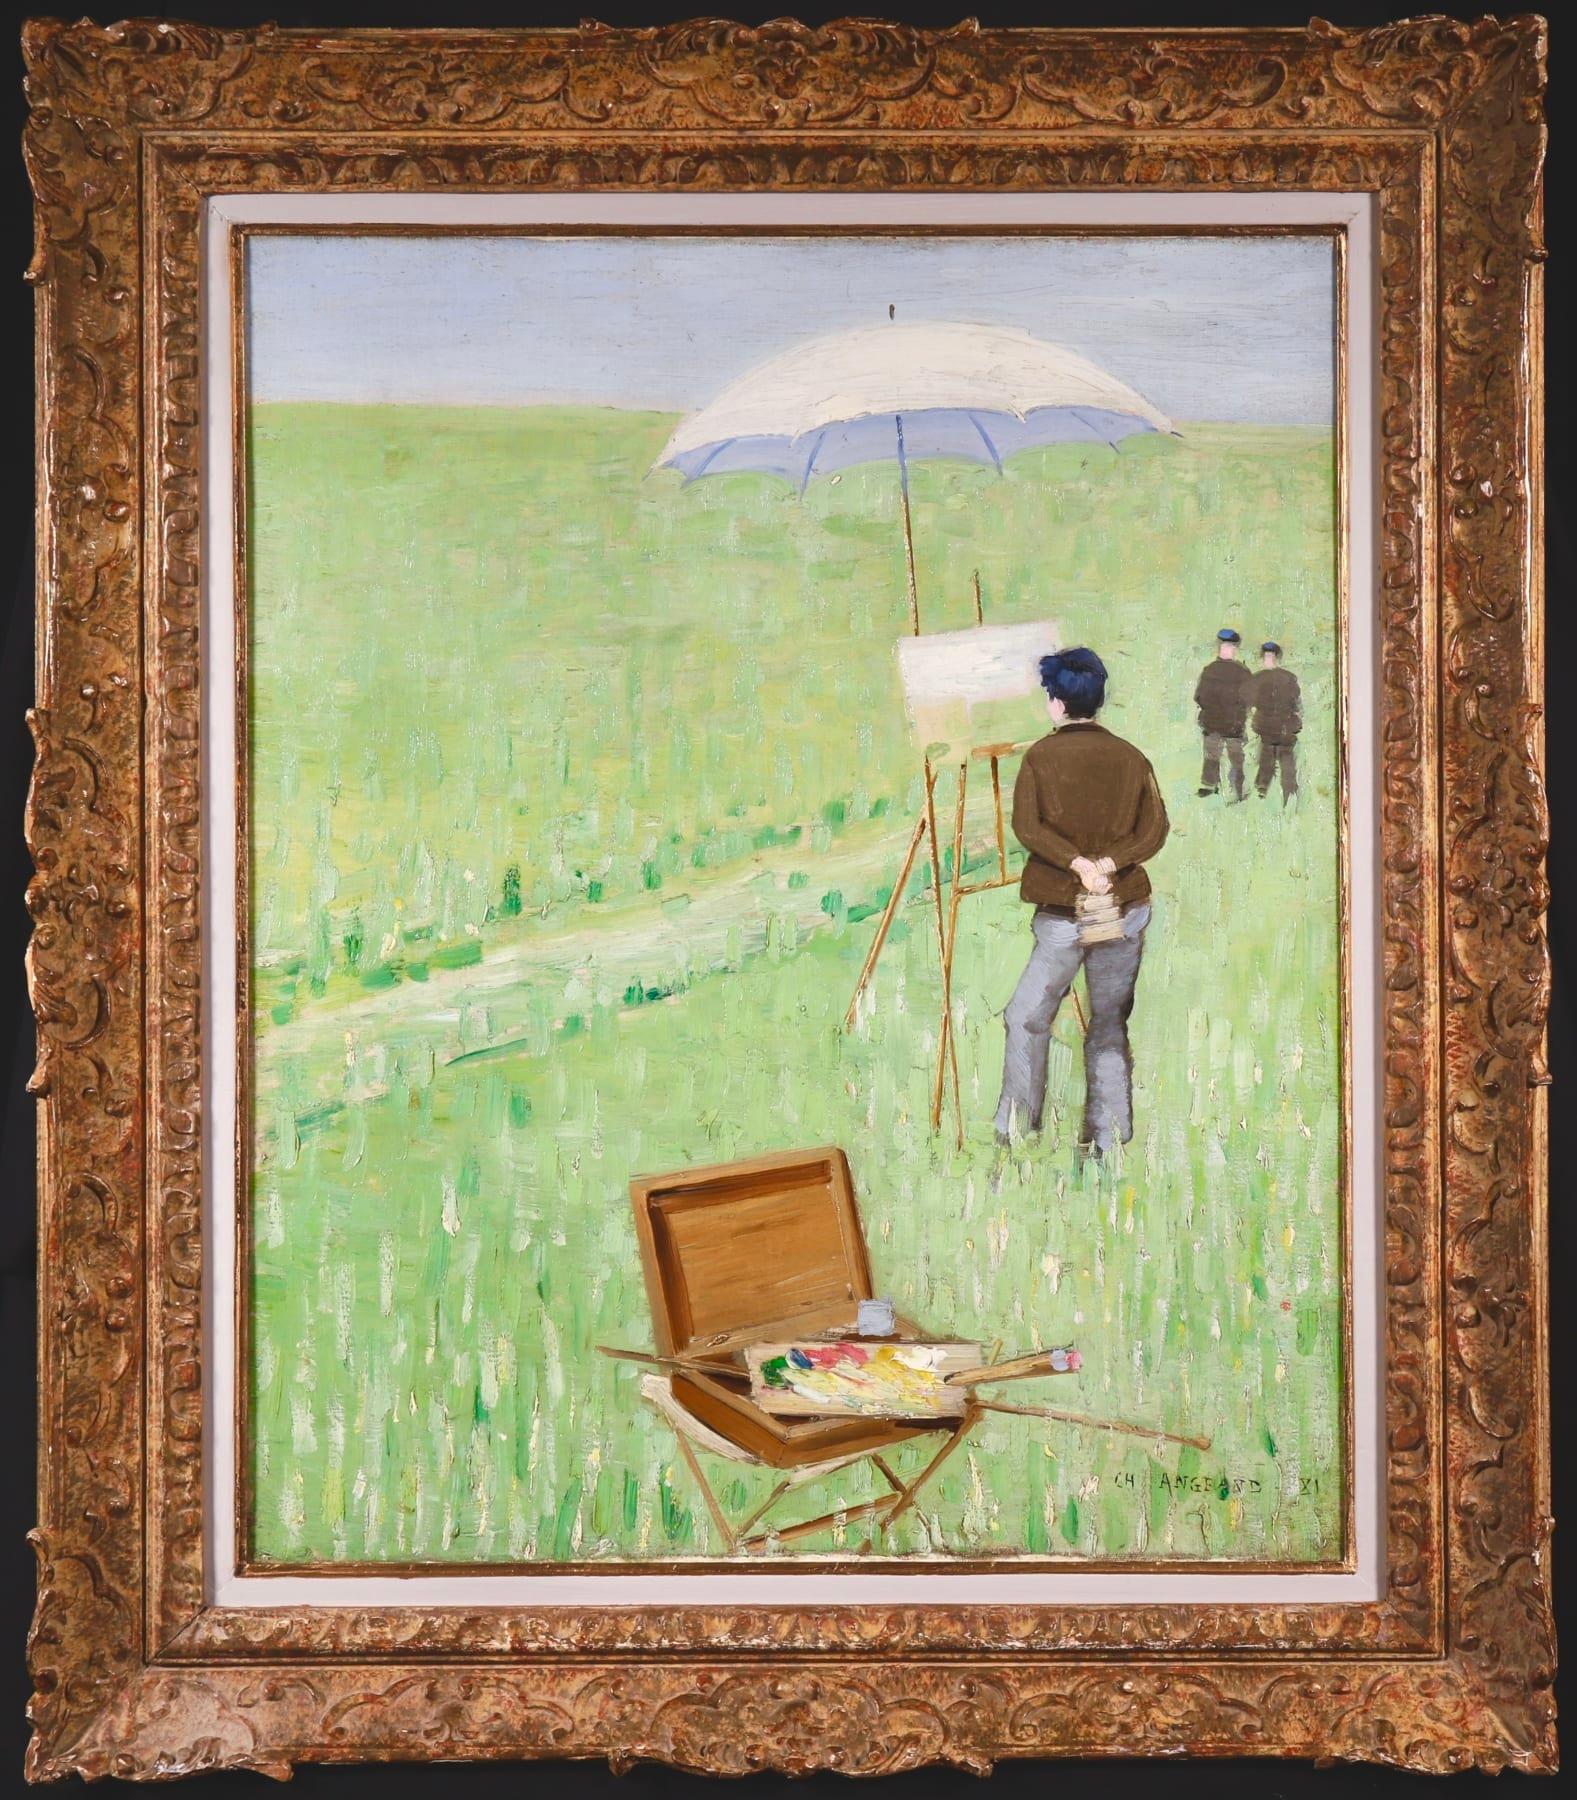 Signed and dated oil on canvas by French impressionist painter Charles Theophile Angrand. This wonderful and good-sized piece depicts an artist painting "en plain air" in a beautiful green meadow with blue skies beyond while two men look on. The